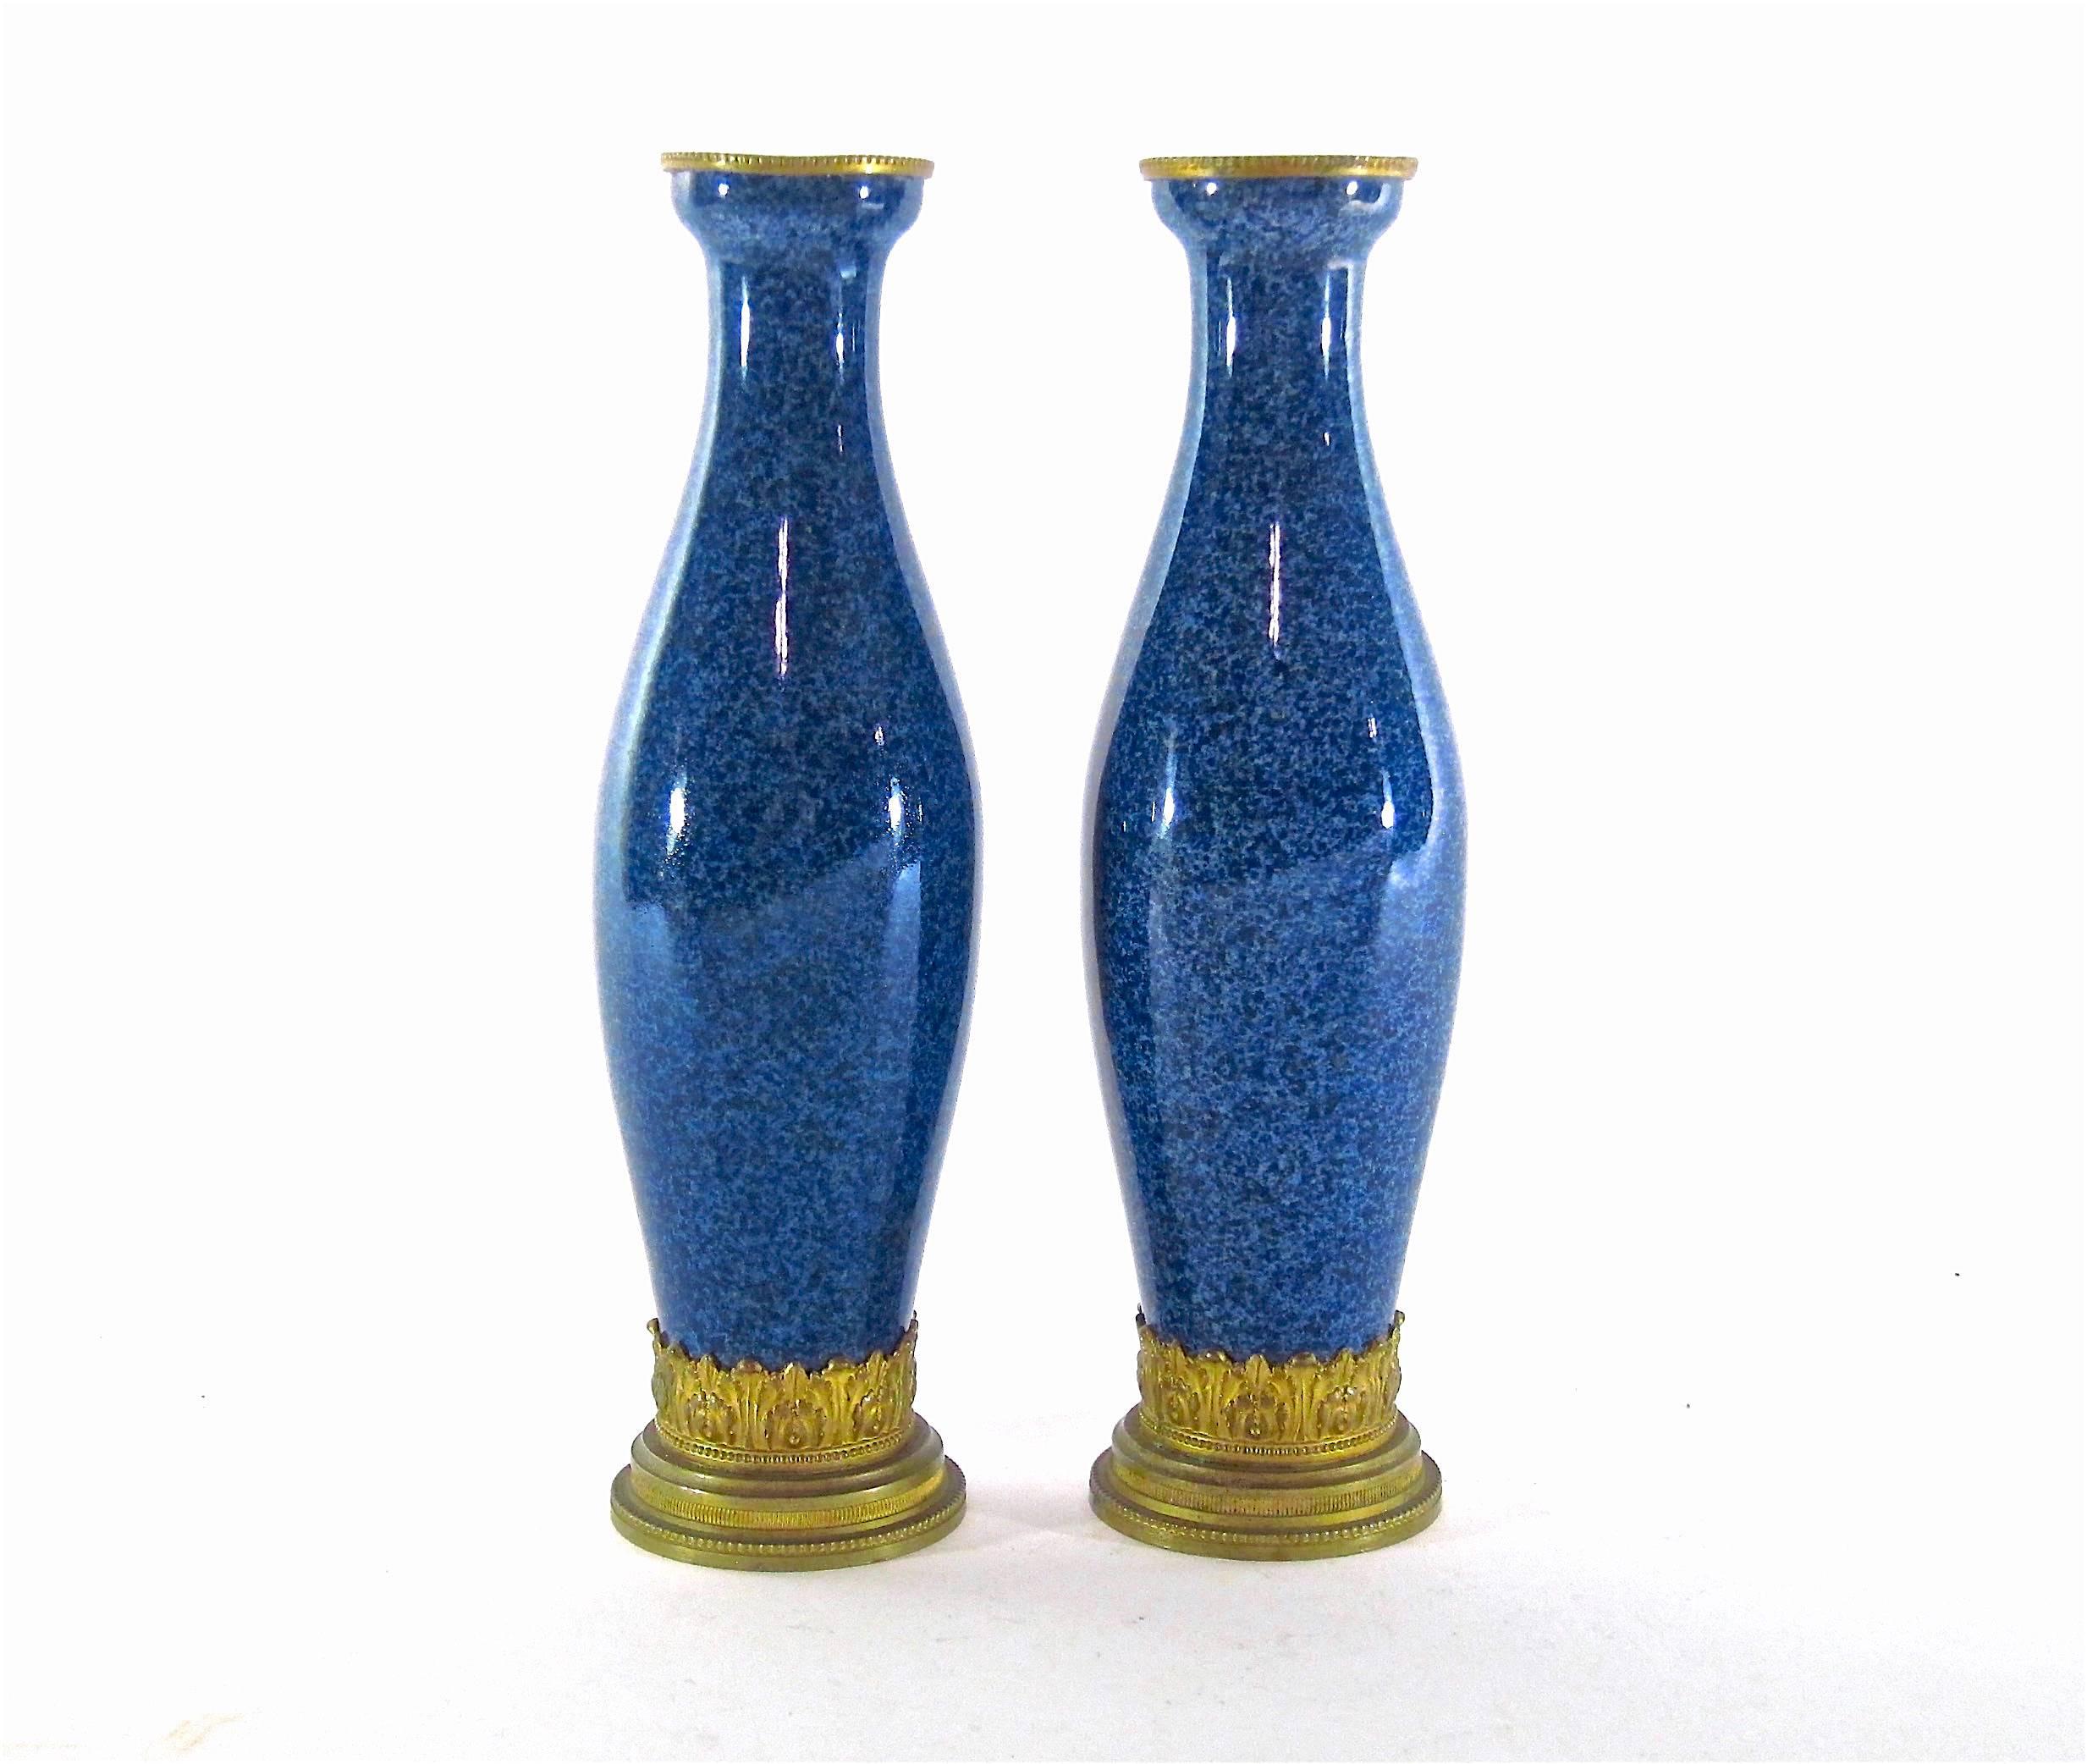 An antique pair of glazed faience cabinet vases with contrasting mounts of ormolu in the French Neoclassical style, designed by Paul Jean Milet (1870-1950) for the Paul Milet Pottery at Sèvres, France, circa 1915. 

Decorated with a sophisticated